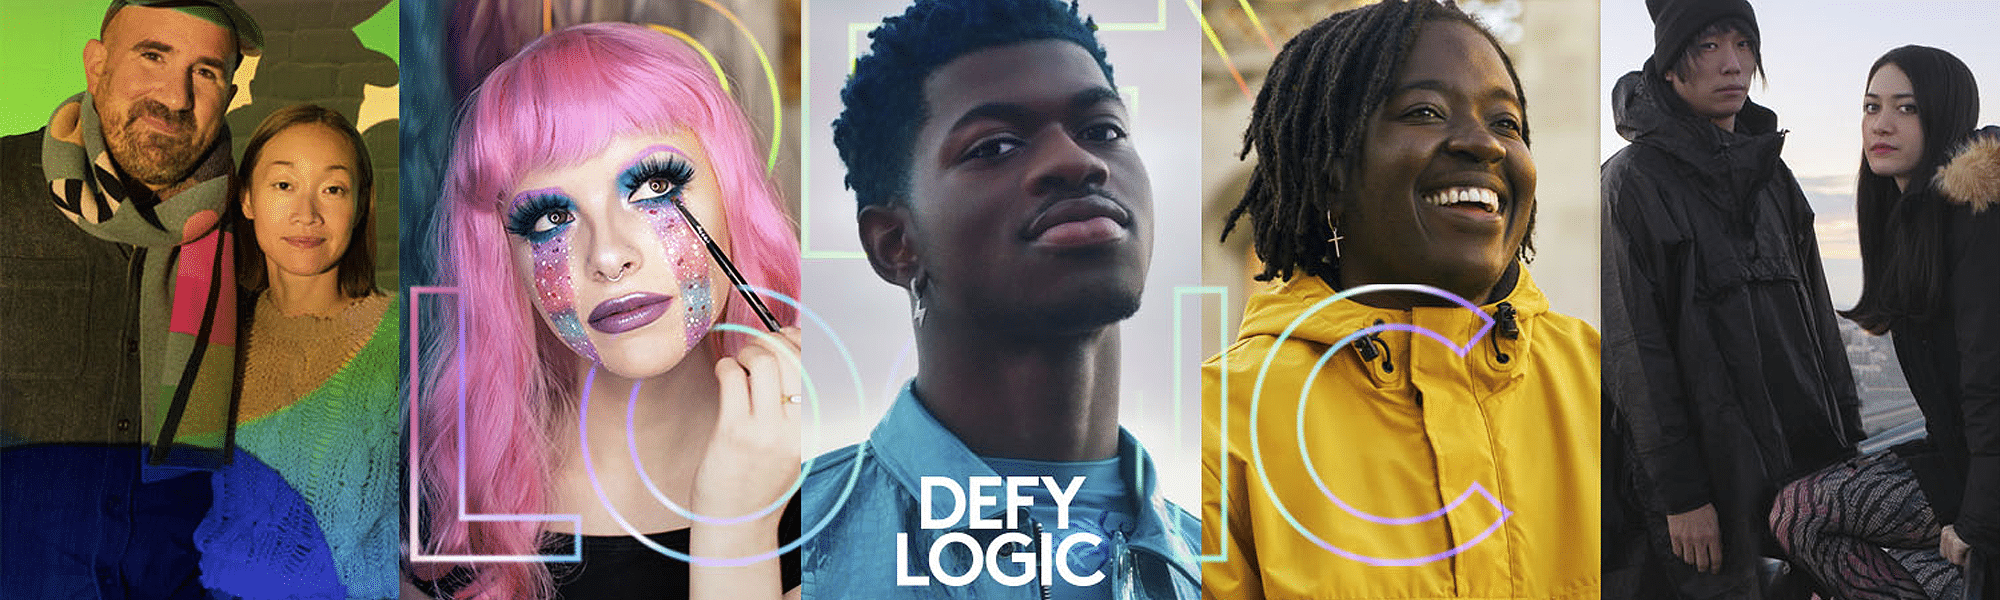 Logitech Launches ‘Defy Logic’ Campaign With Game Day Ad